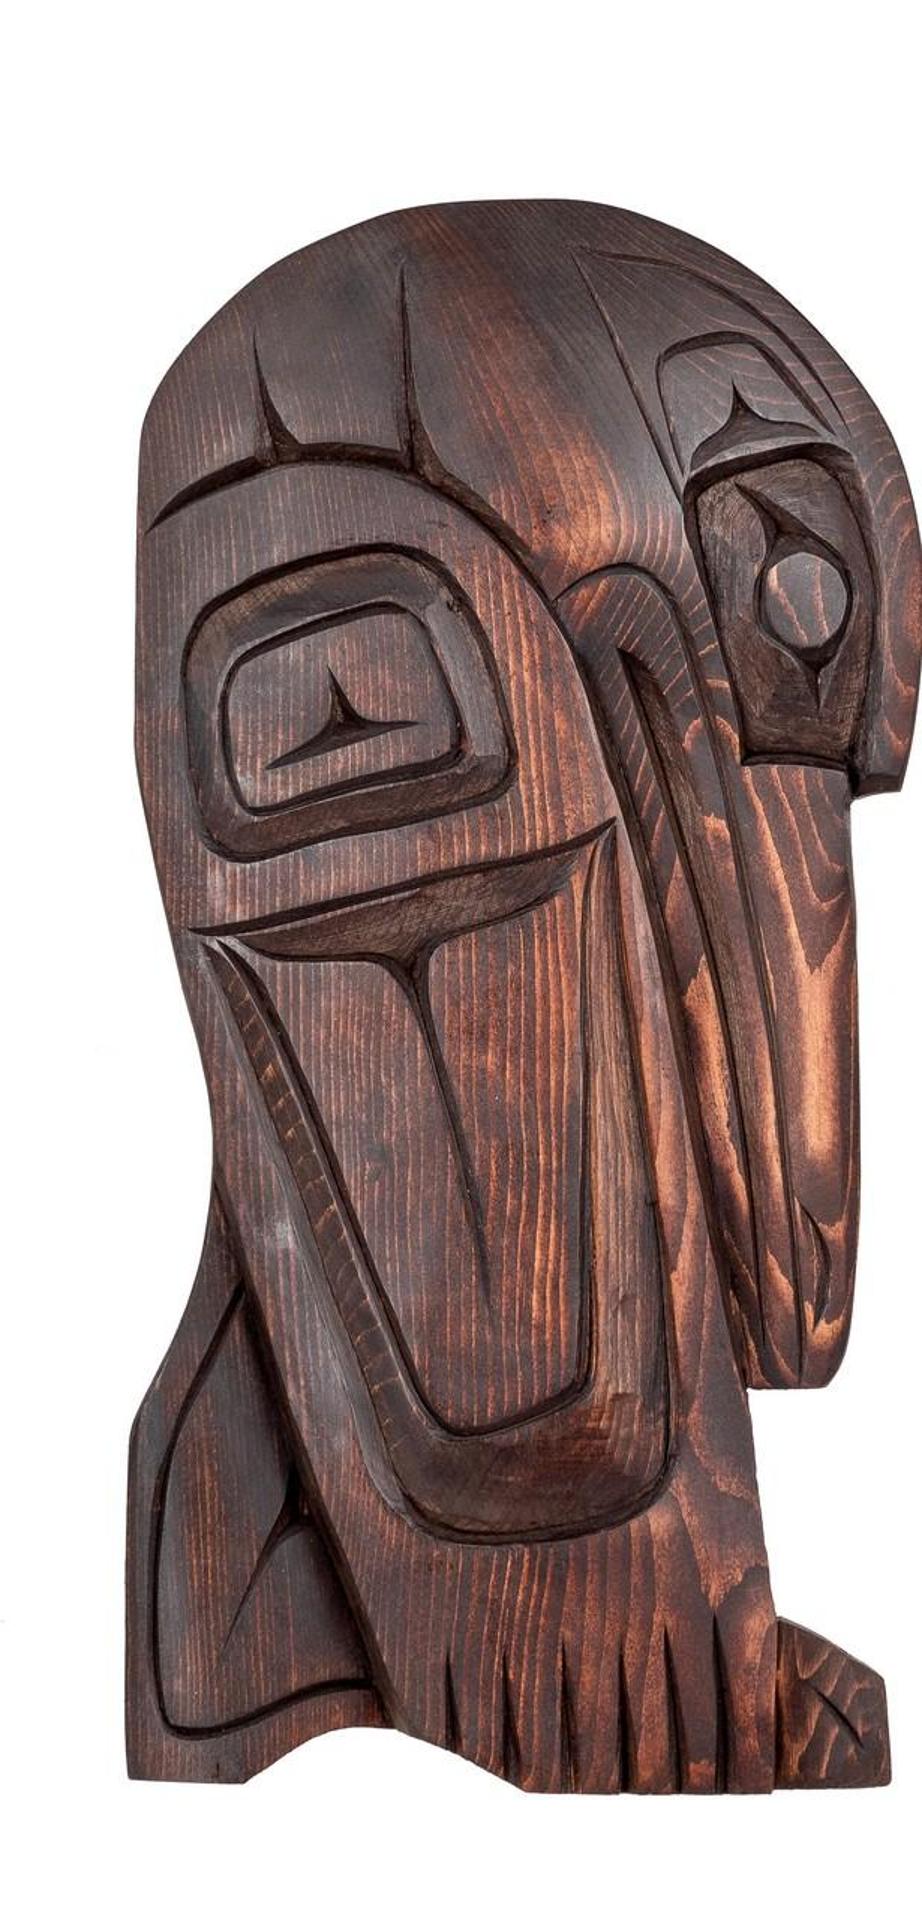 Roger Johnnie - a carved and stained cedar plaque depicting Raven